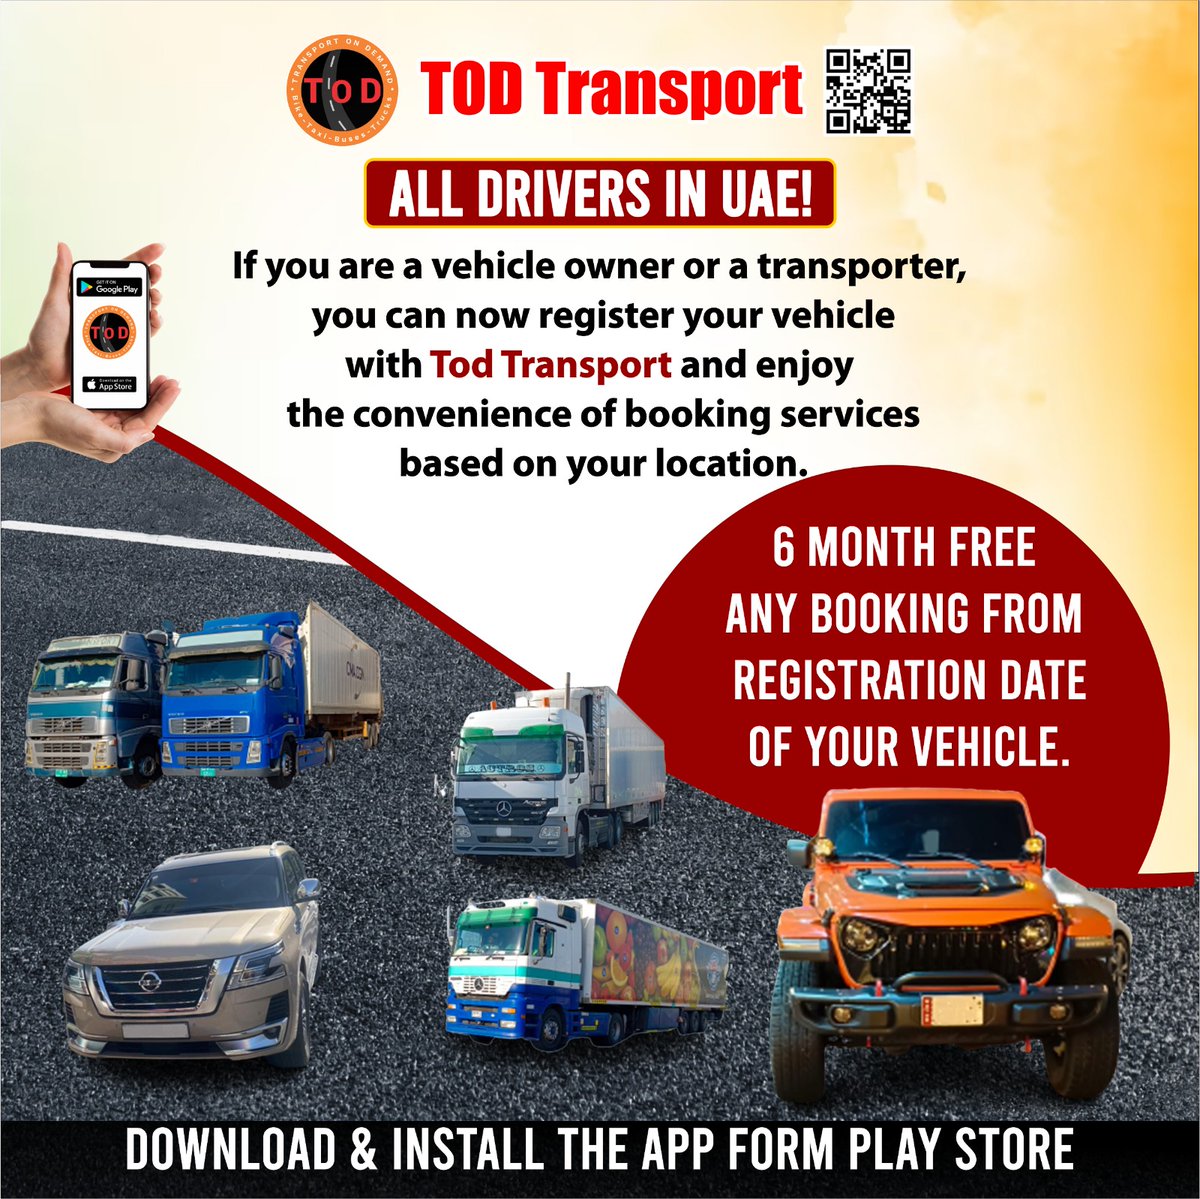 🌟 Seamless travels through the UAE are just a tap away with TOD Transport UAE! 🚗✨ Download our app now to access hassle-free bookings and enjoy the ride. 📲🇦🇪 Let's make your journey as remarkable as your destination! #TODTransportUAE #EffortlessRides #DownloadToday